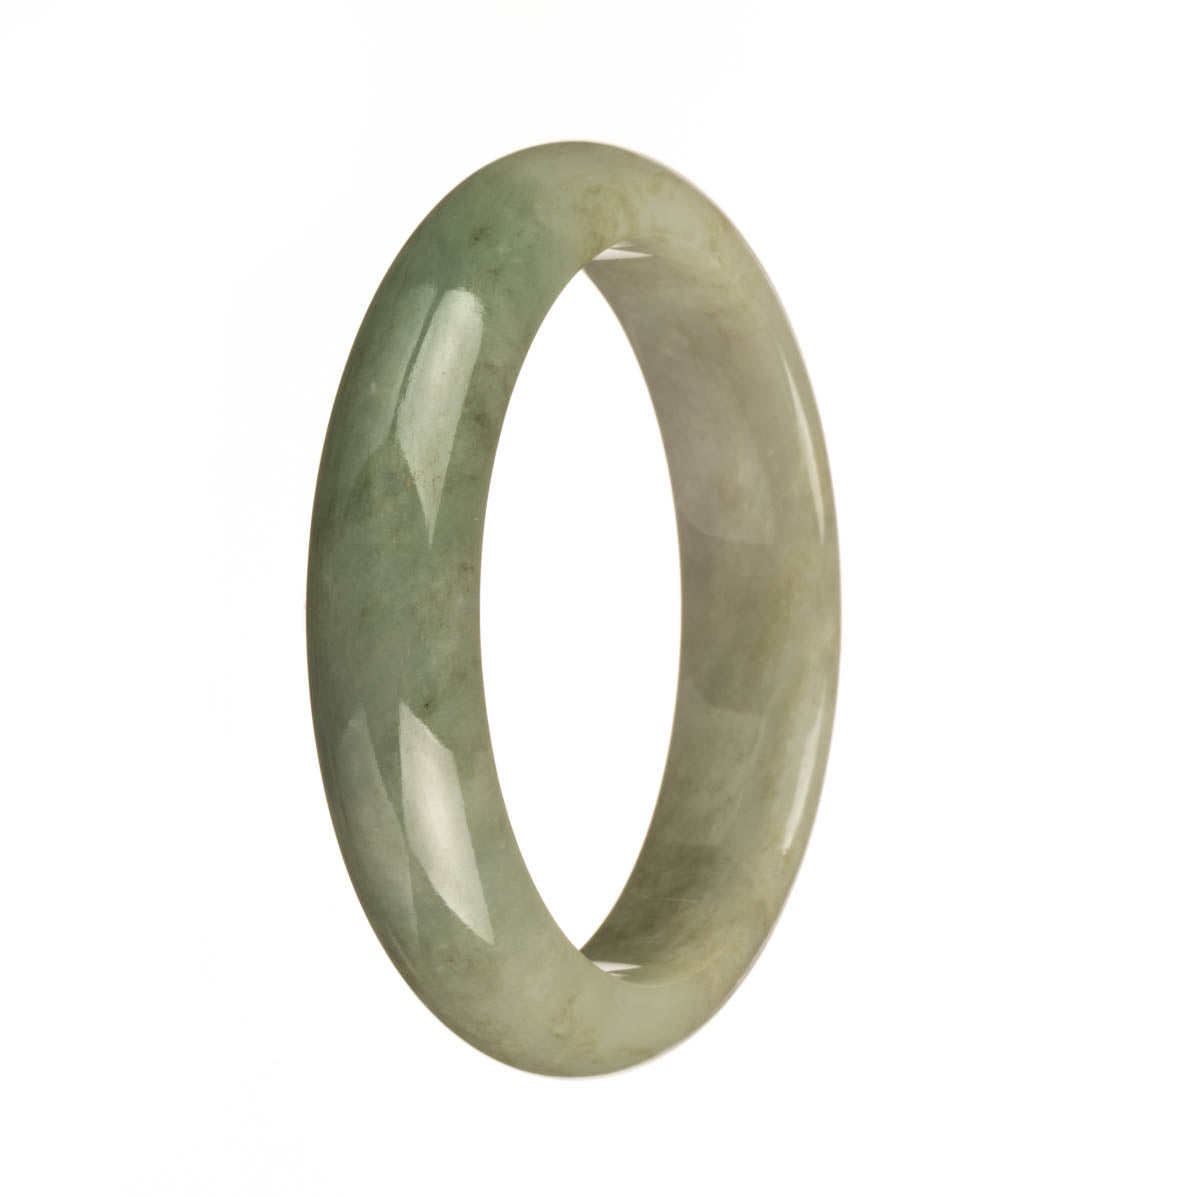 A beautiful half-moon shaped jade bangle in green and grey colors, made of genuine untreated jadeite jade. Perfect for adding a touch of elegance to any outfit.